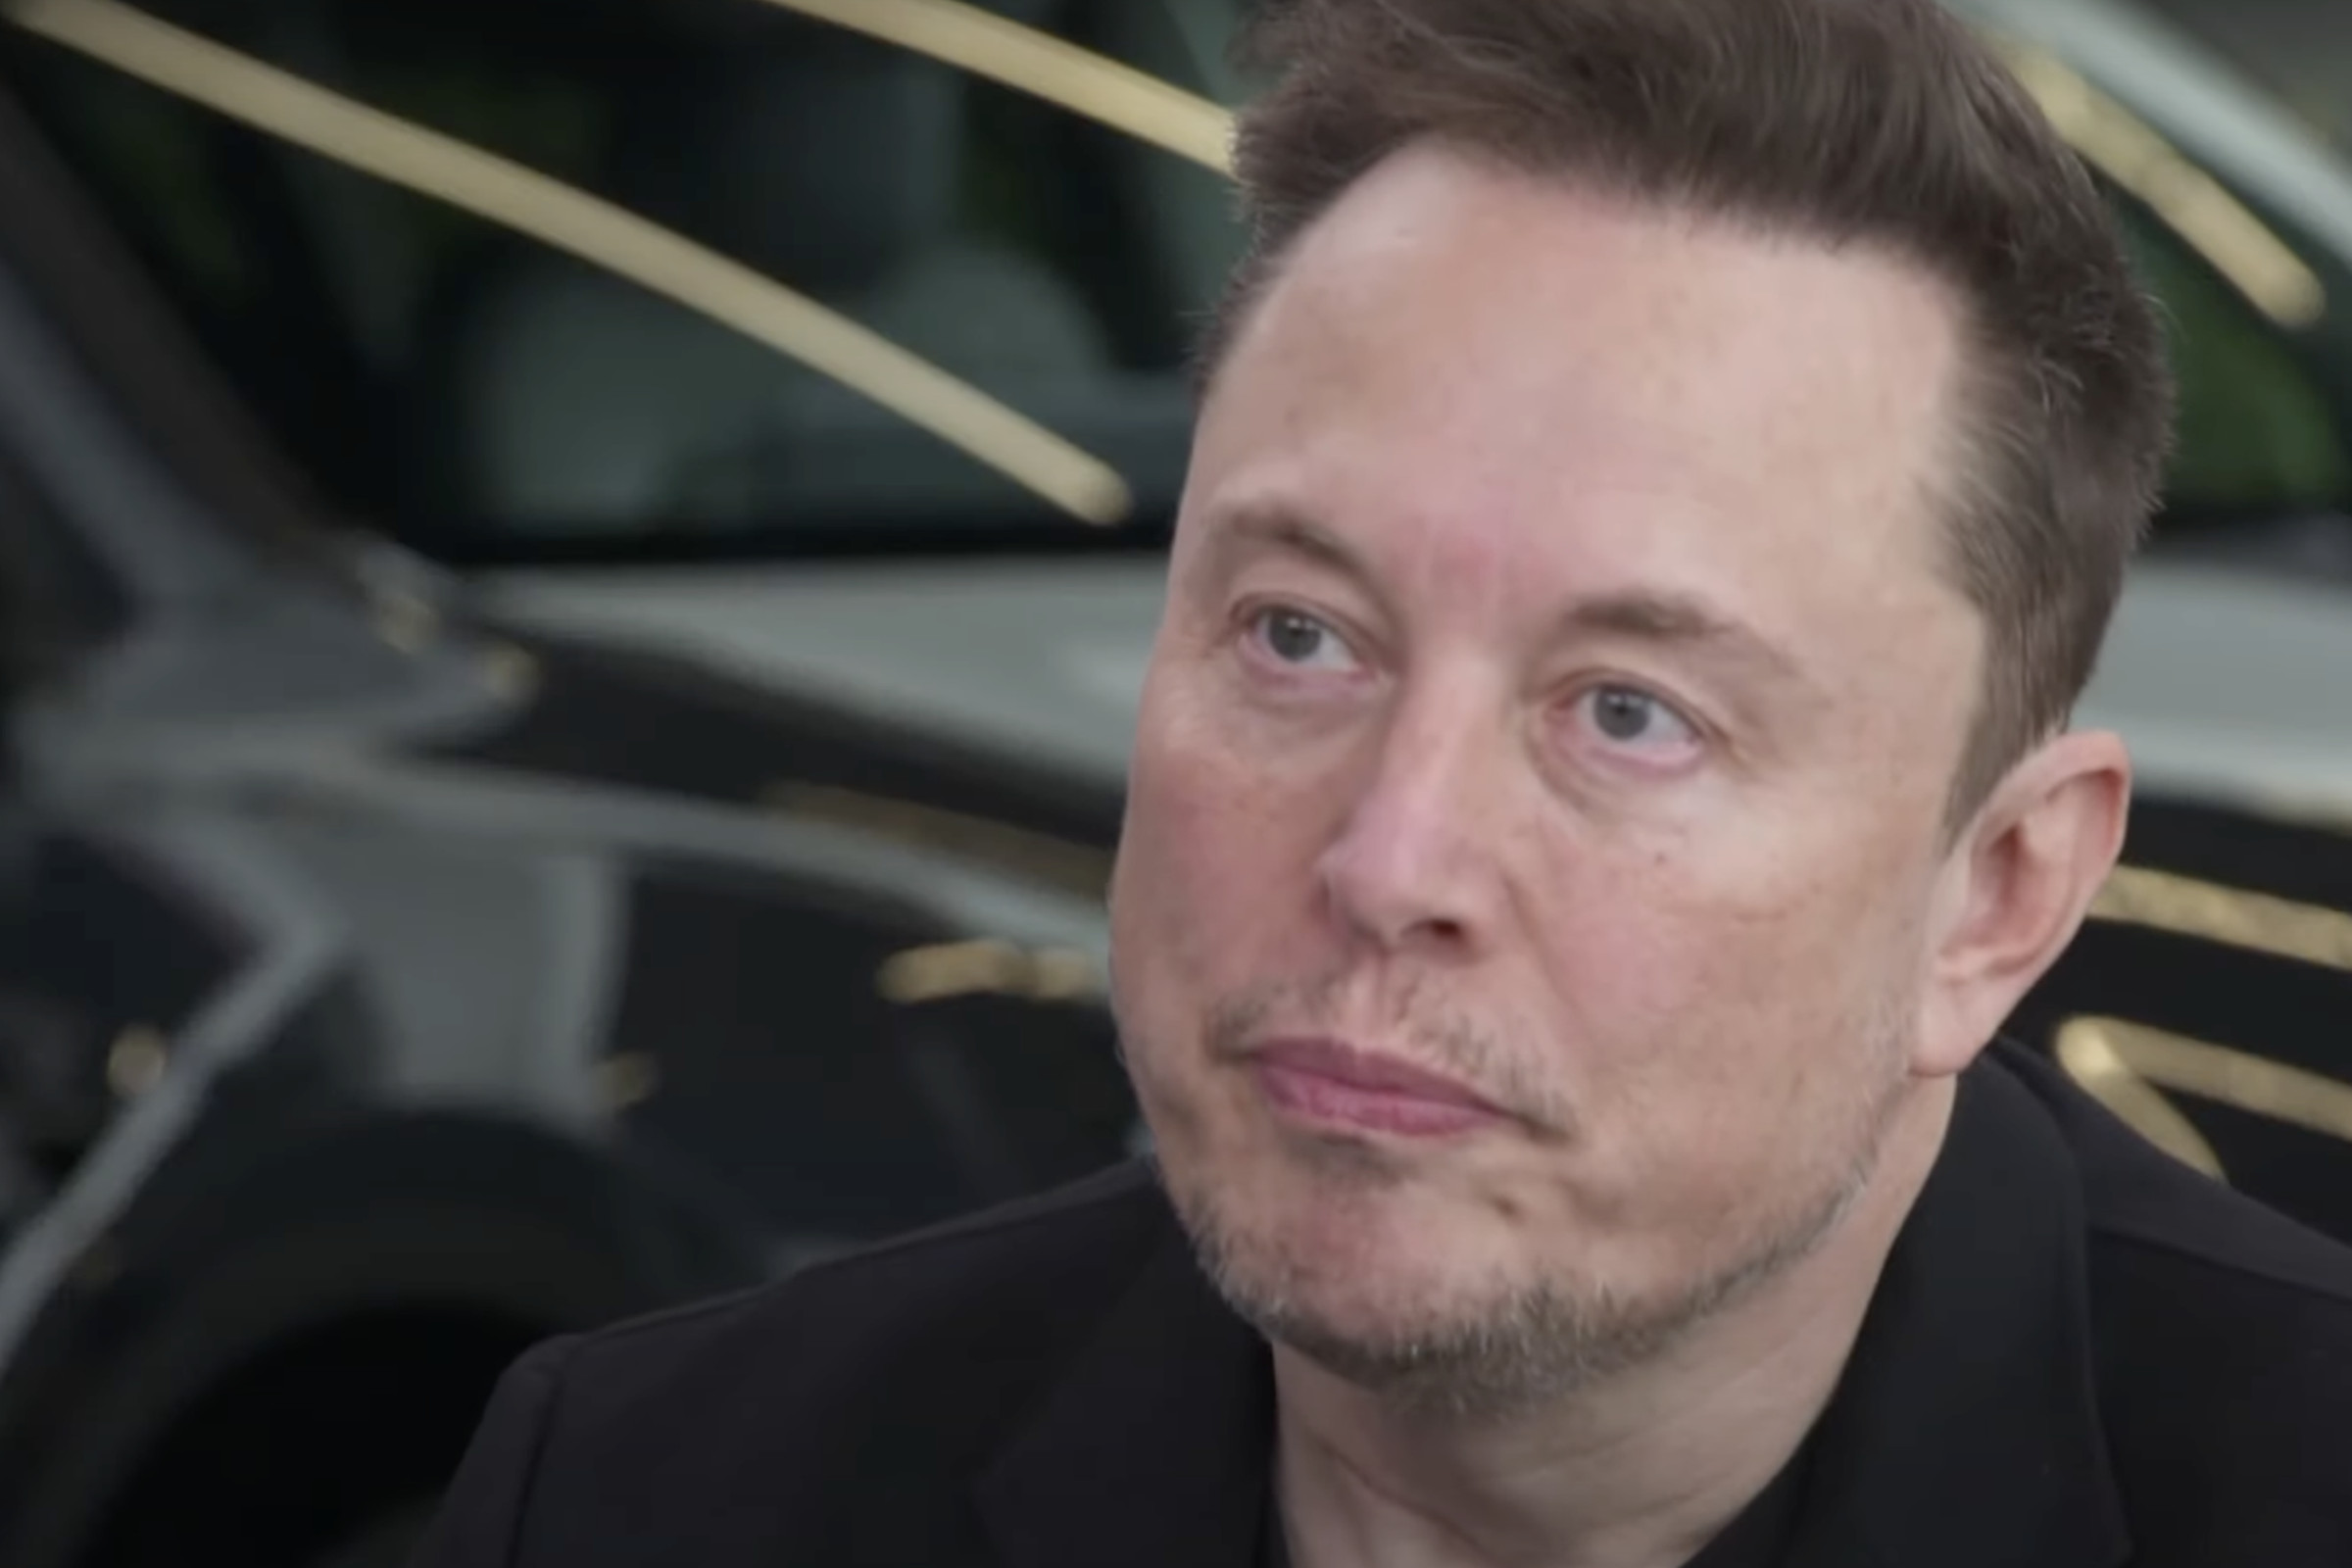 A screenshot of Elon Musk during his interview with Don Lemon